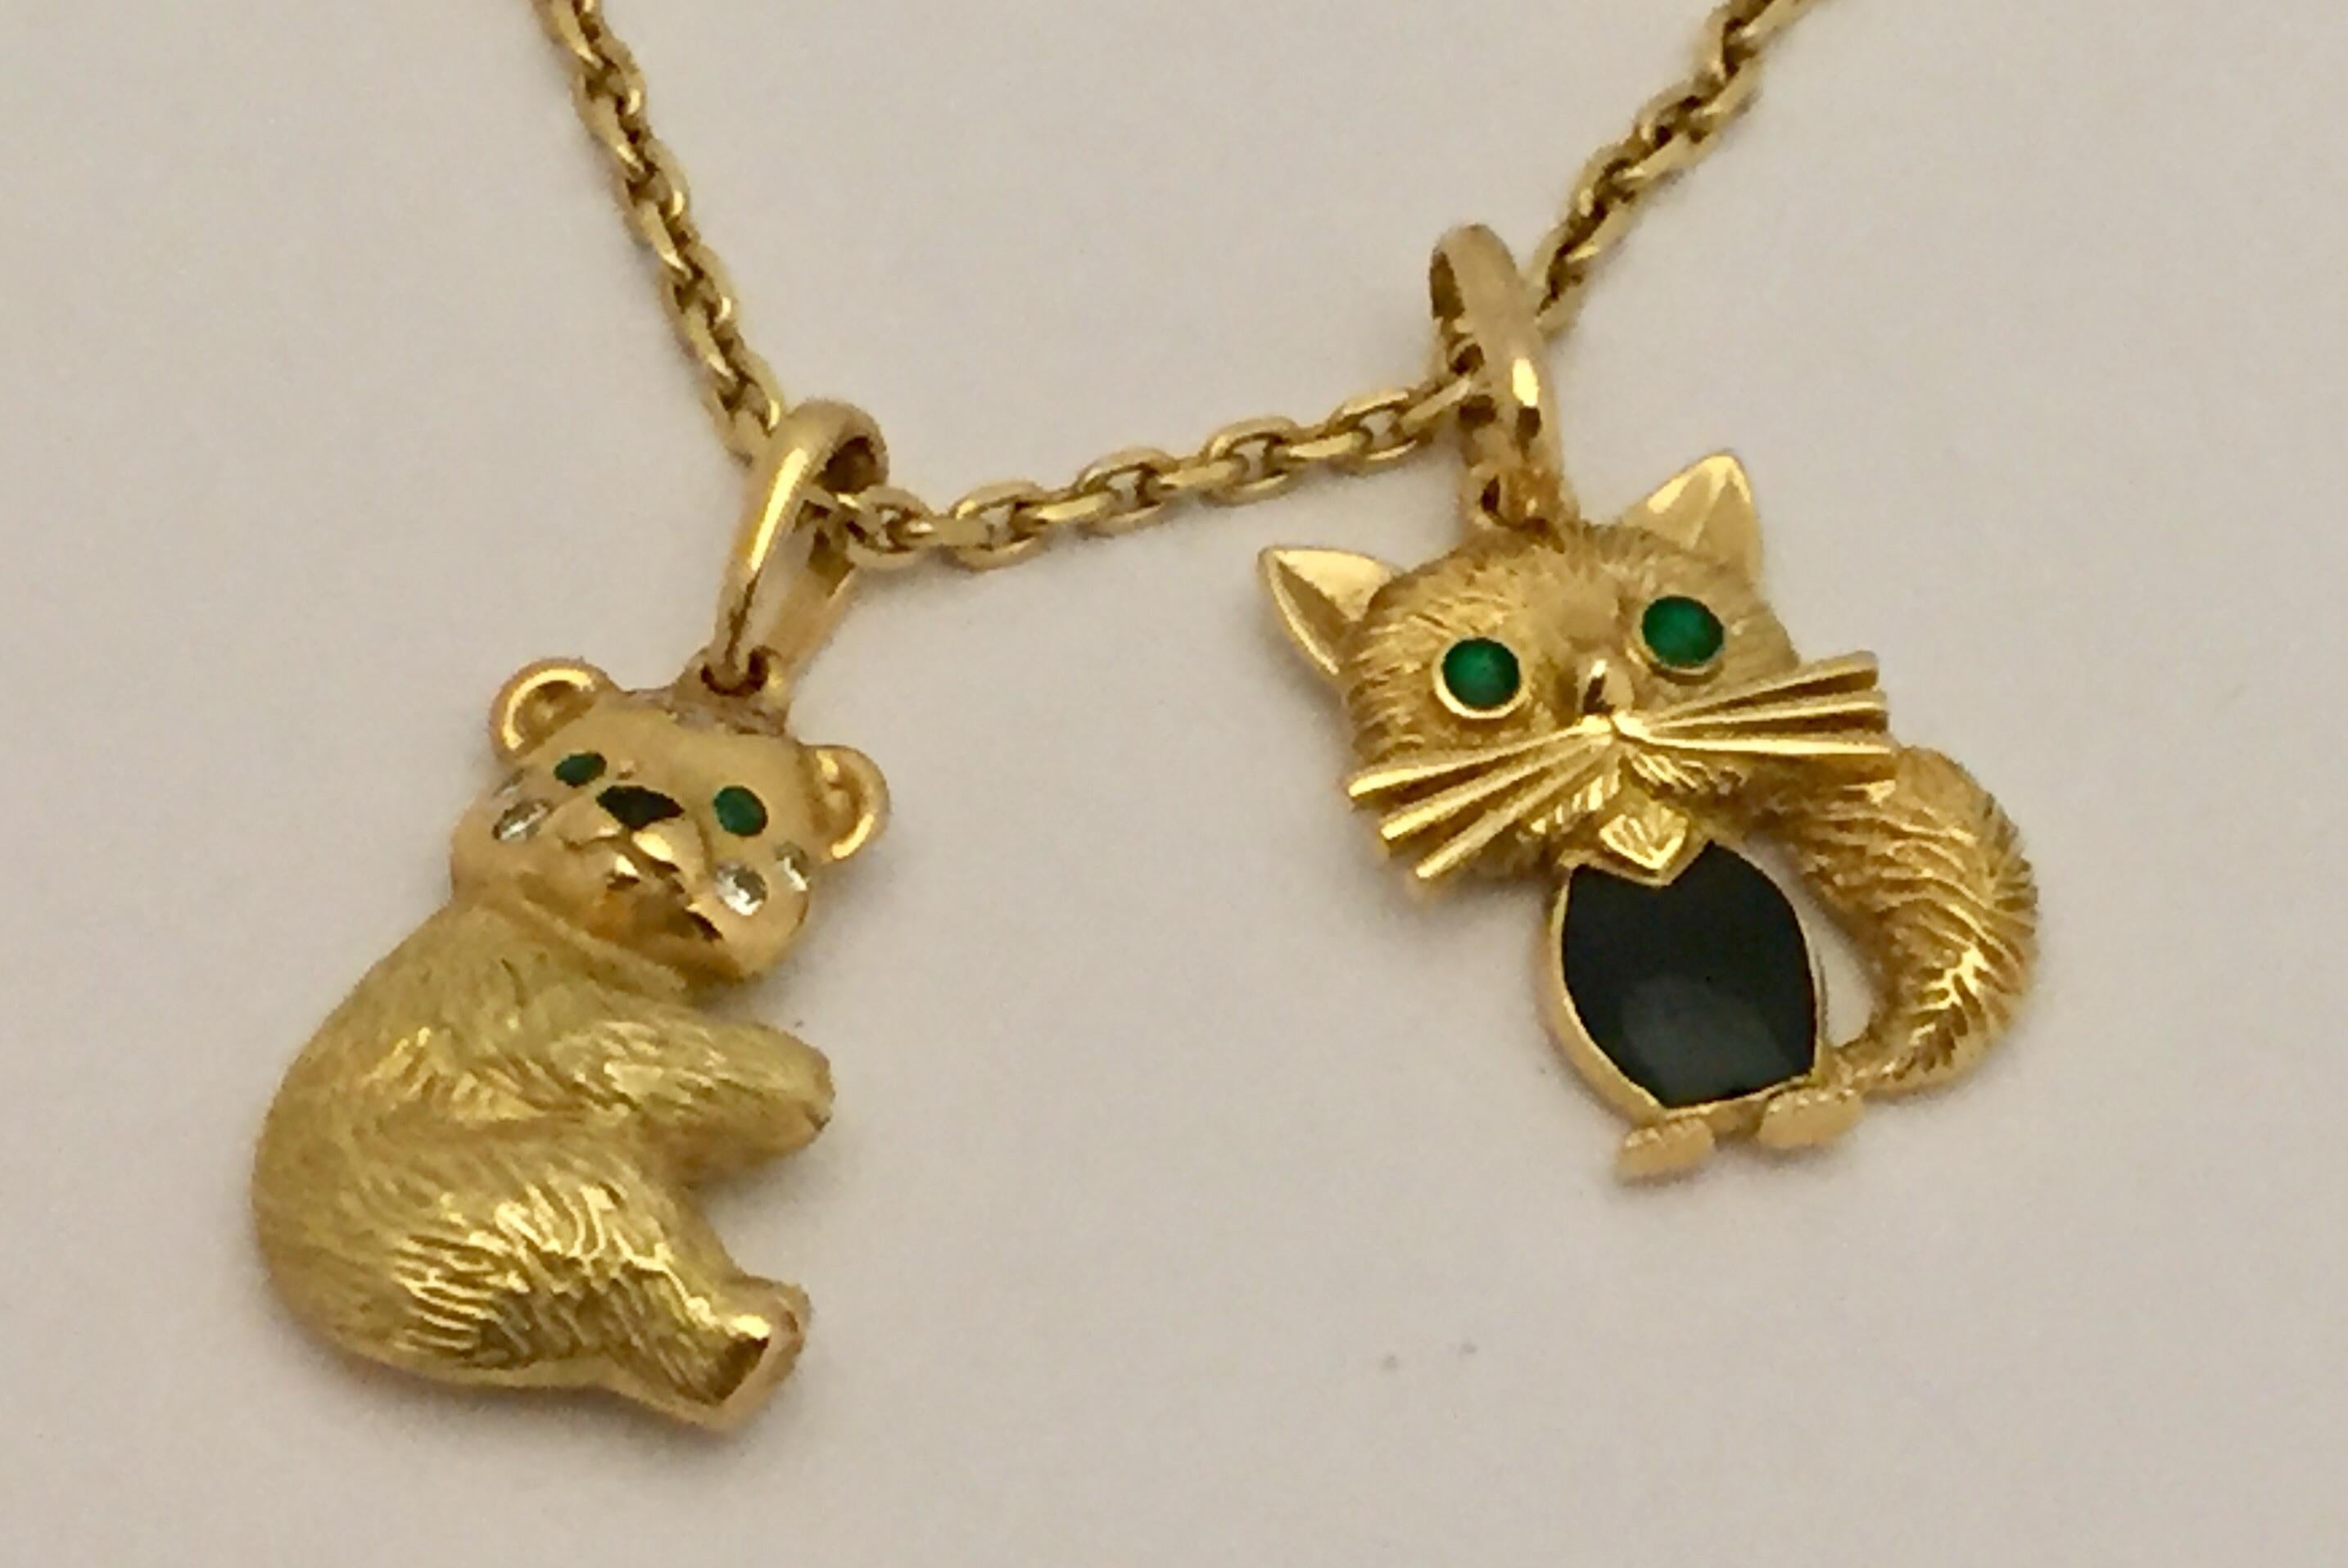 This rare and fabulous 2 Van Cleef & Arpels pendants feature the iconic chat malicieux  and bear design and are crafted in 18 K textured yellow gold and decorated with  emerald and enamel eyes accented with sparkling diamonds and enamel.  Made in